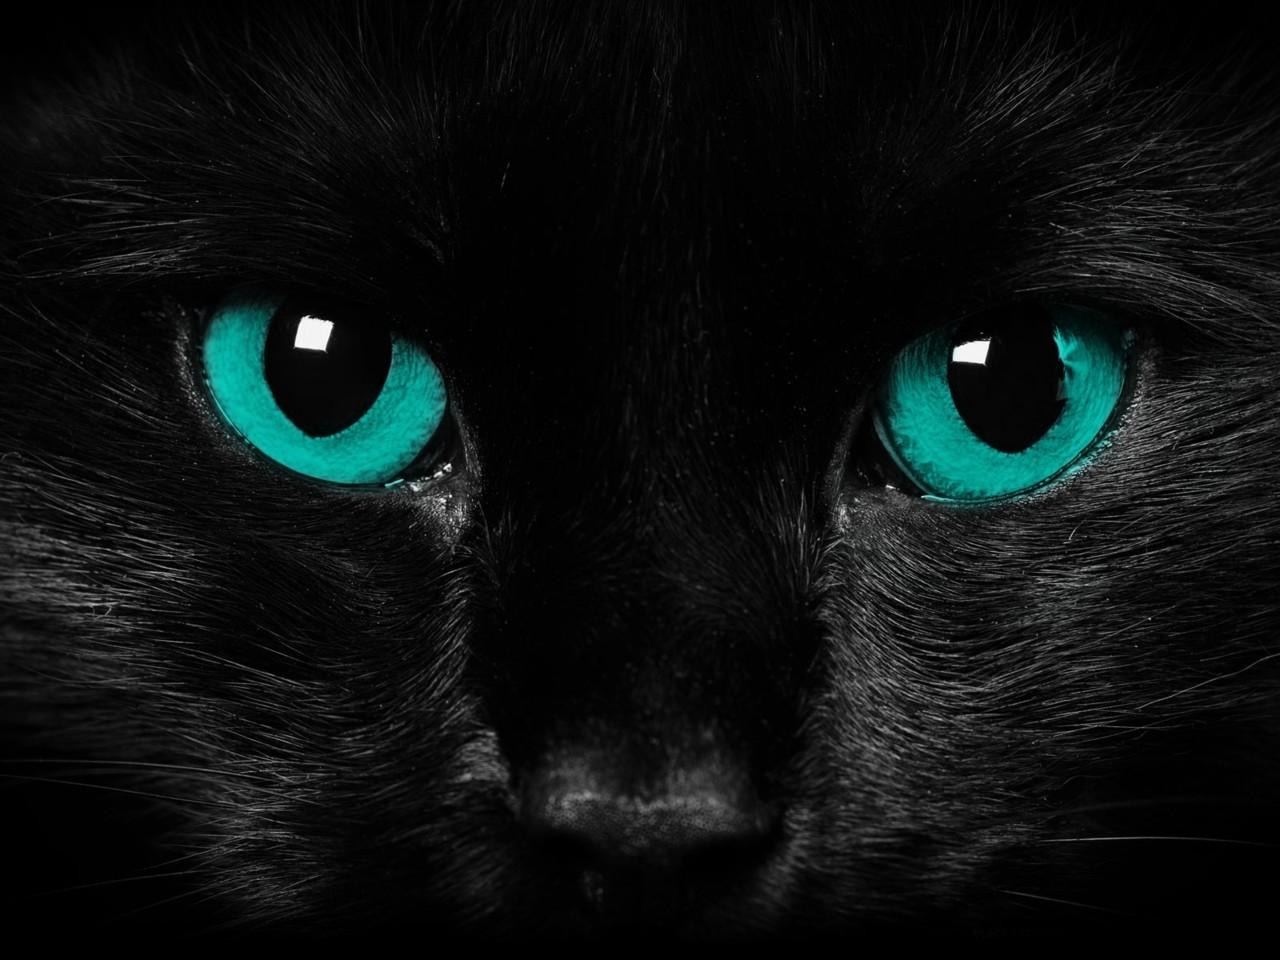 A Cat with Blue and Green Logo - What color does your cat see? - Valley Cats IncValley Cats Inc